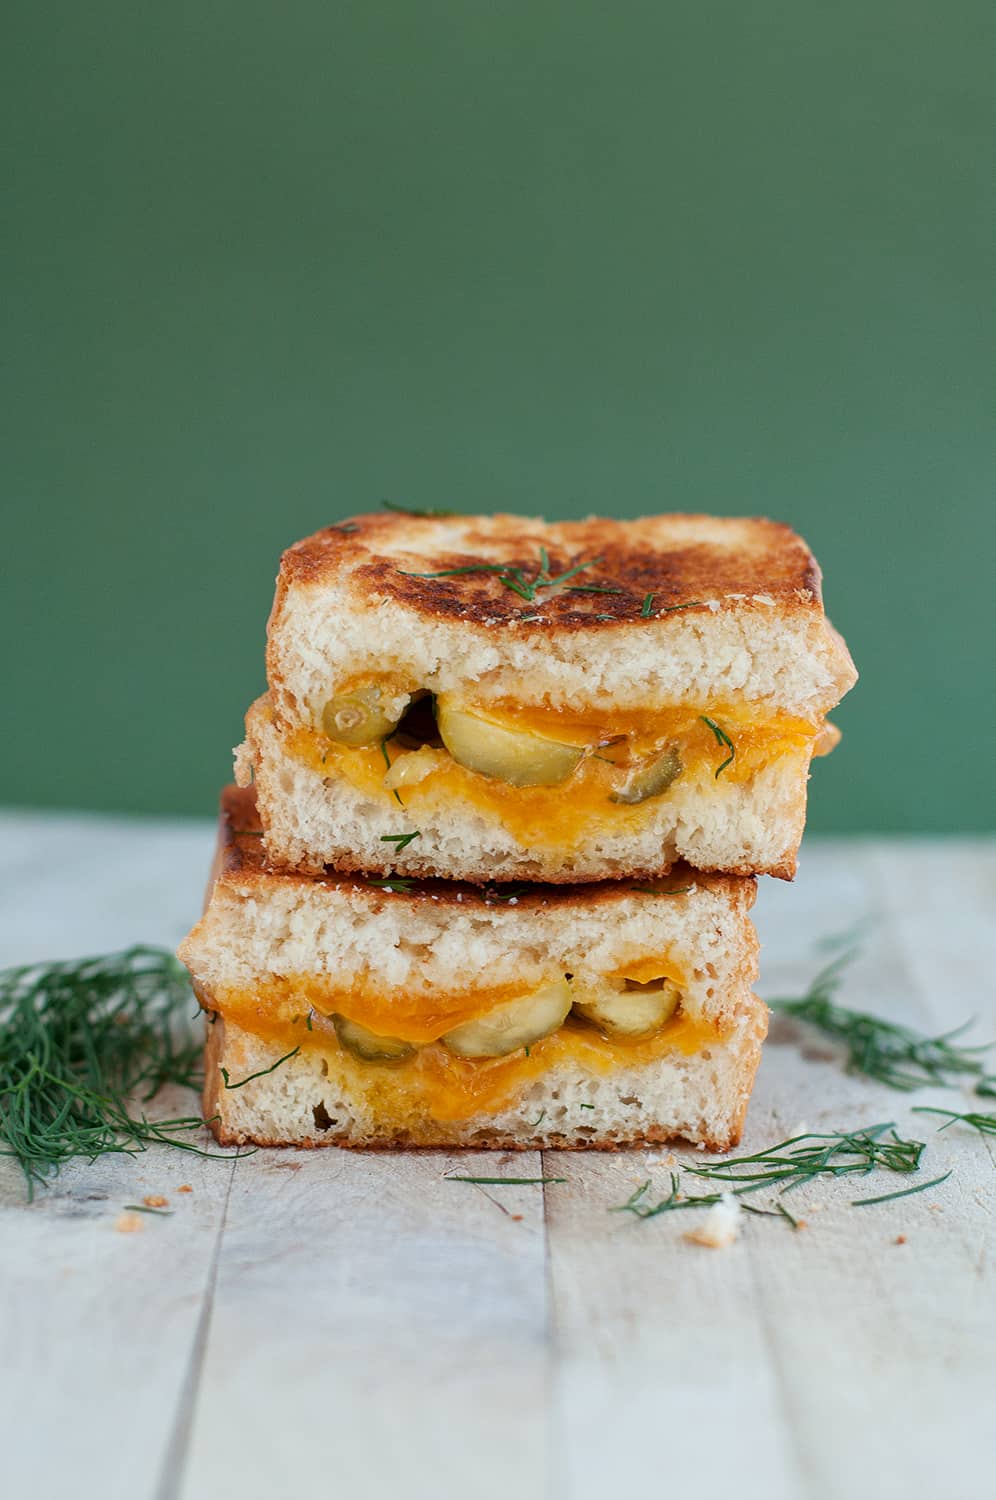 Dill pickle grilled cheese